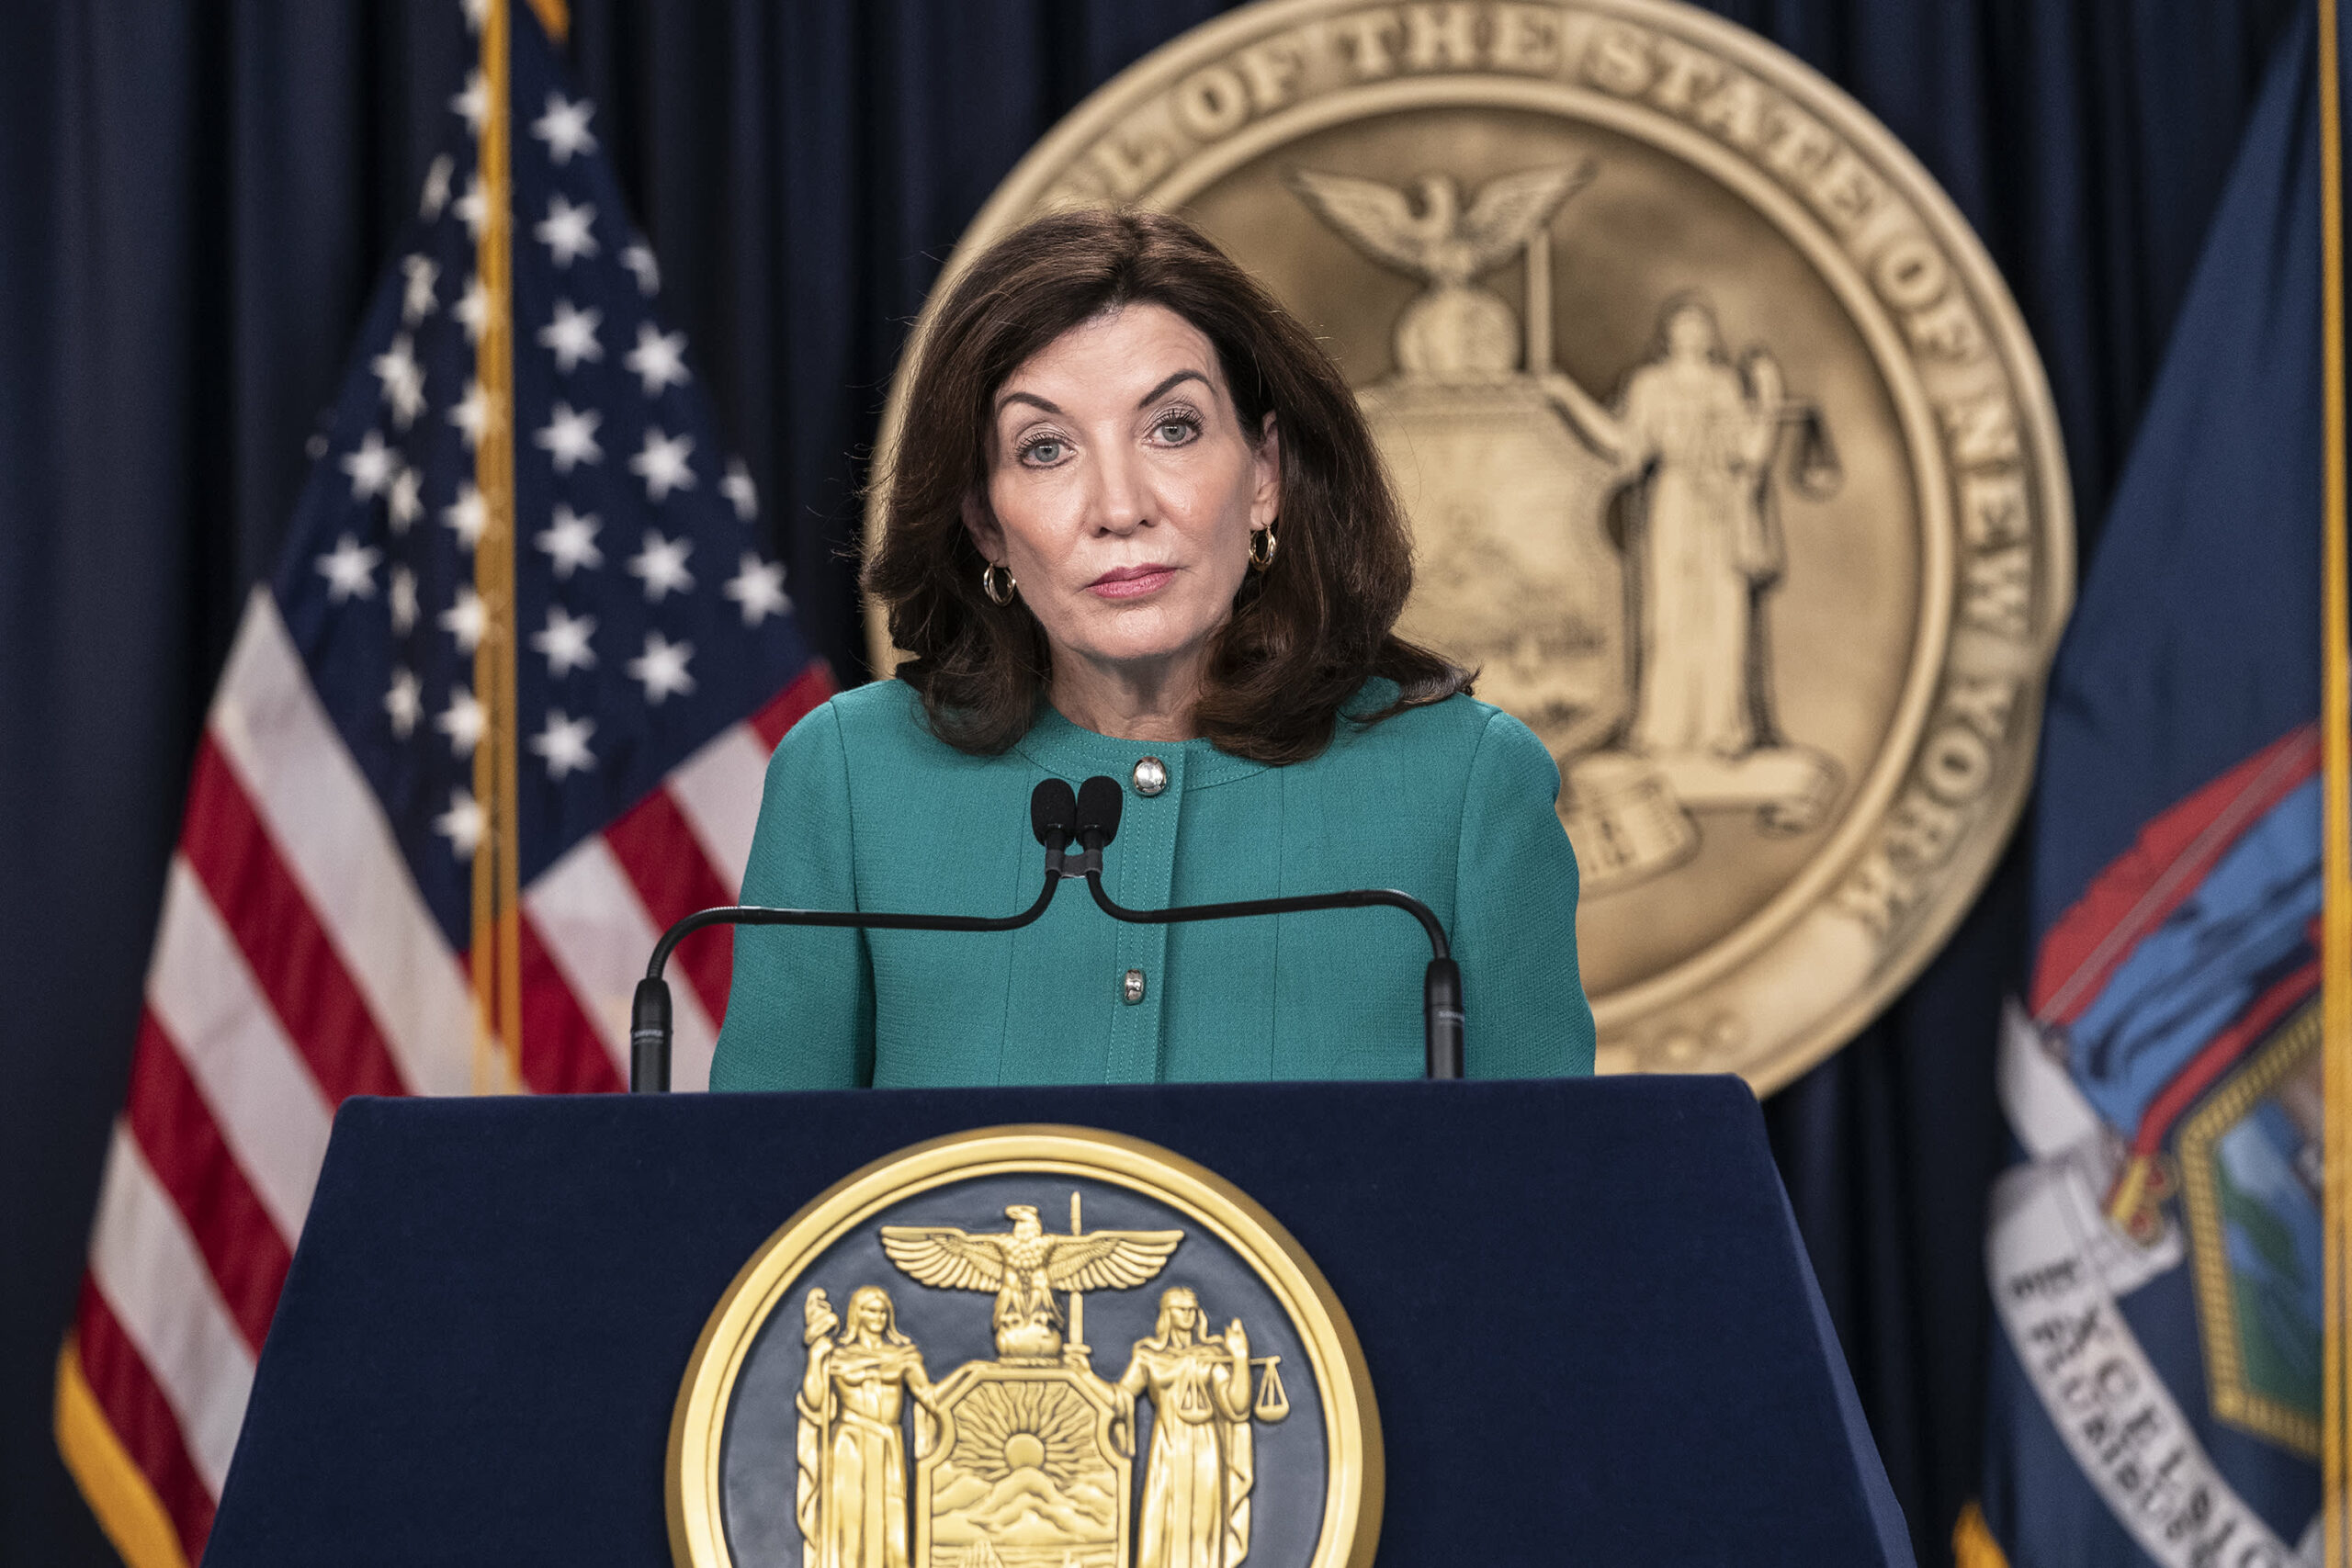 New York Covid numbers are finally trending down, Gov. Hochul says